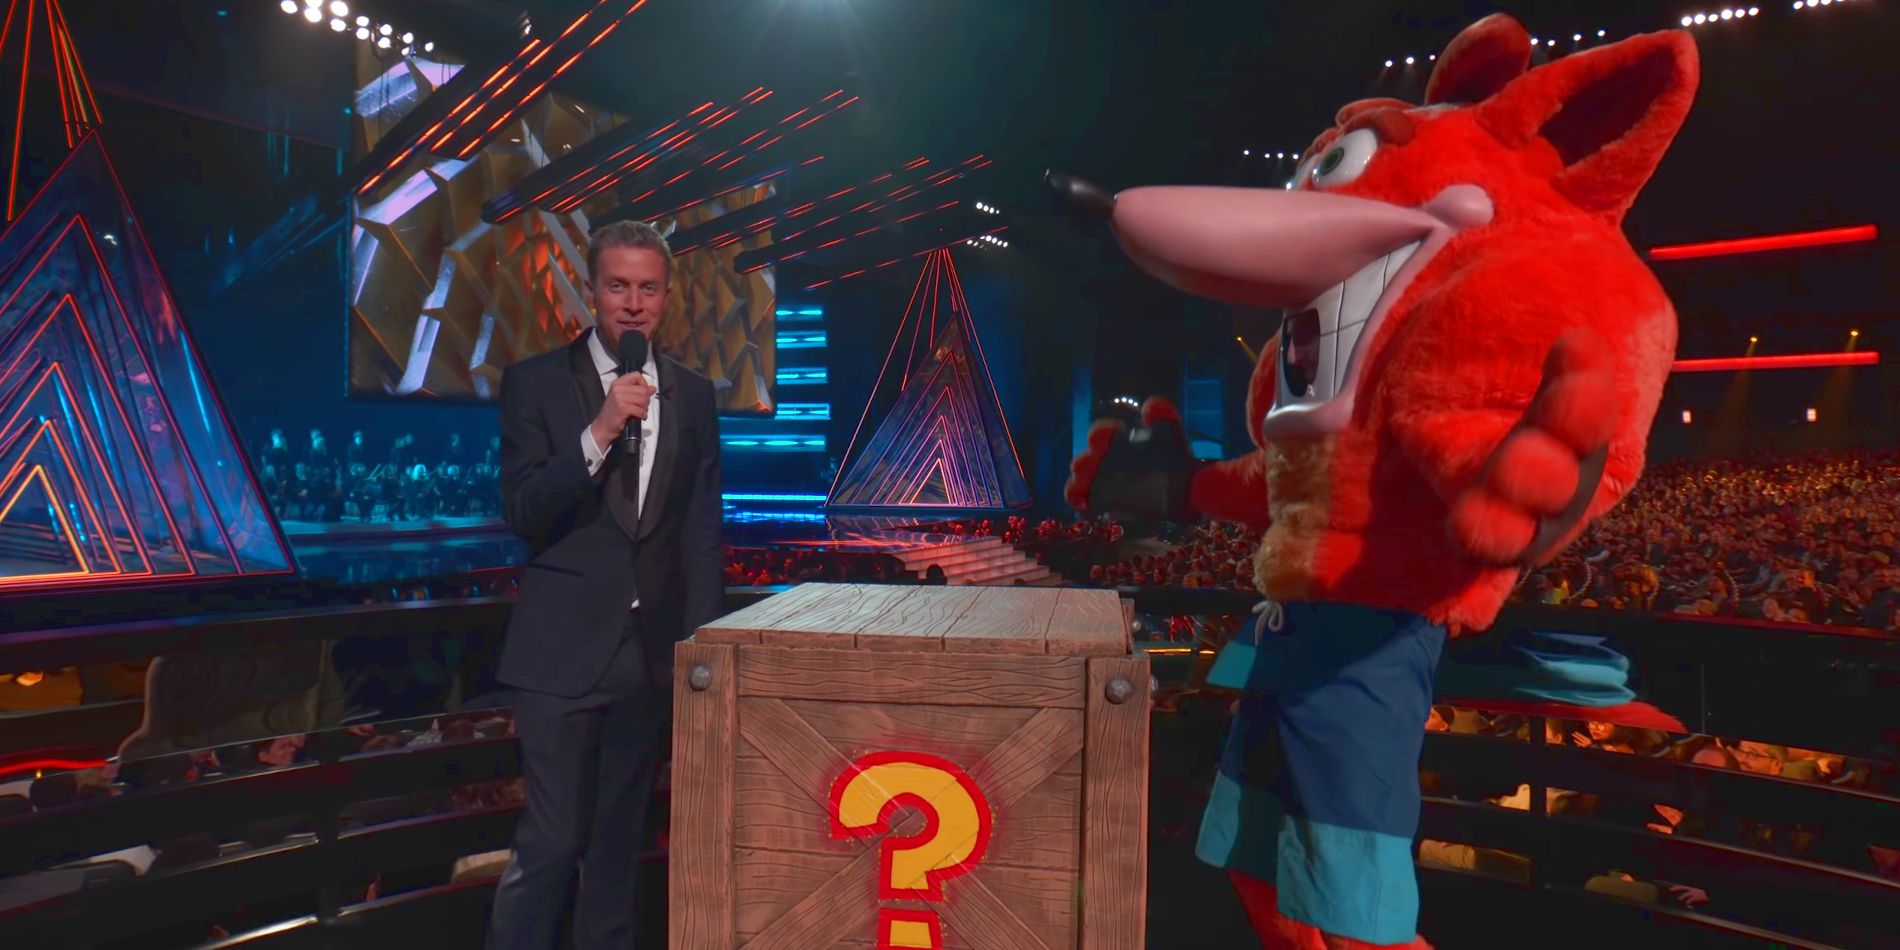 Crash Bandicoot joined Geoff Keighley on The Game Awards 2018 to announced the Crash Team Racing remake.